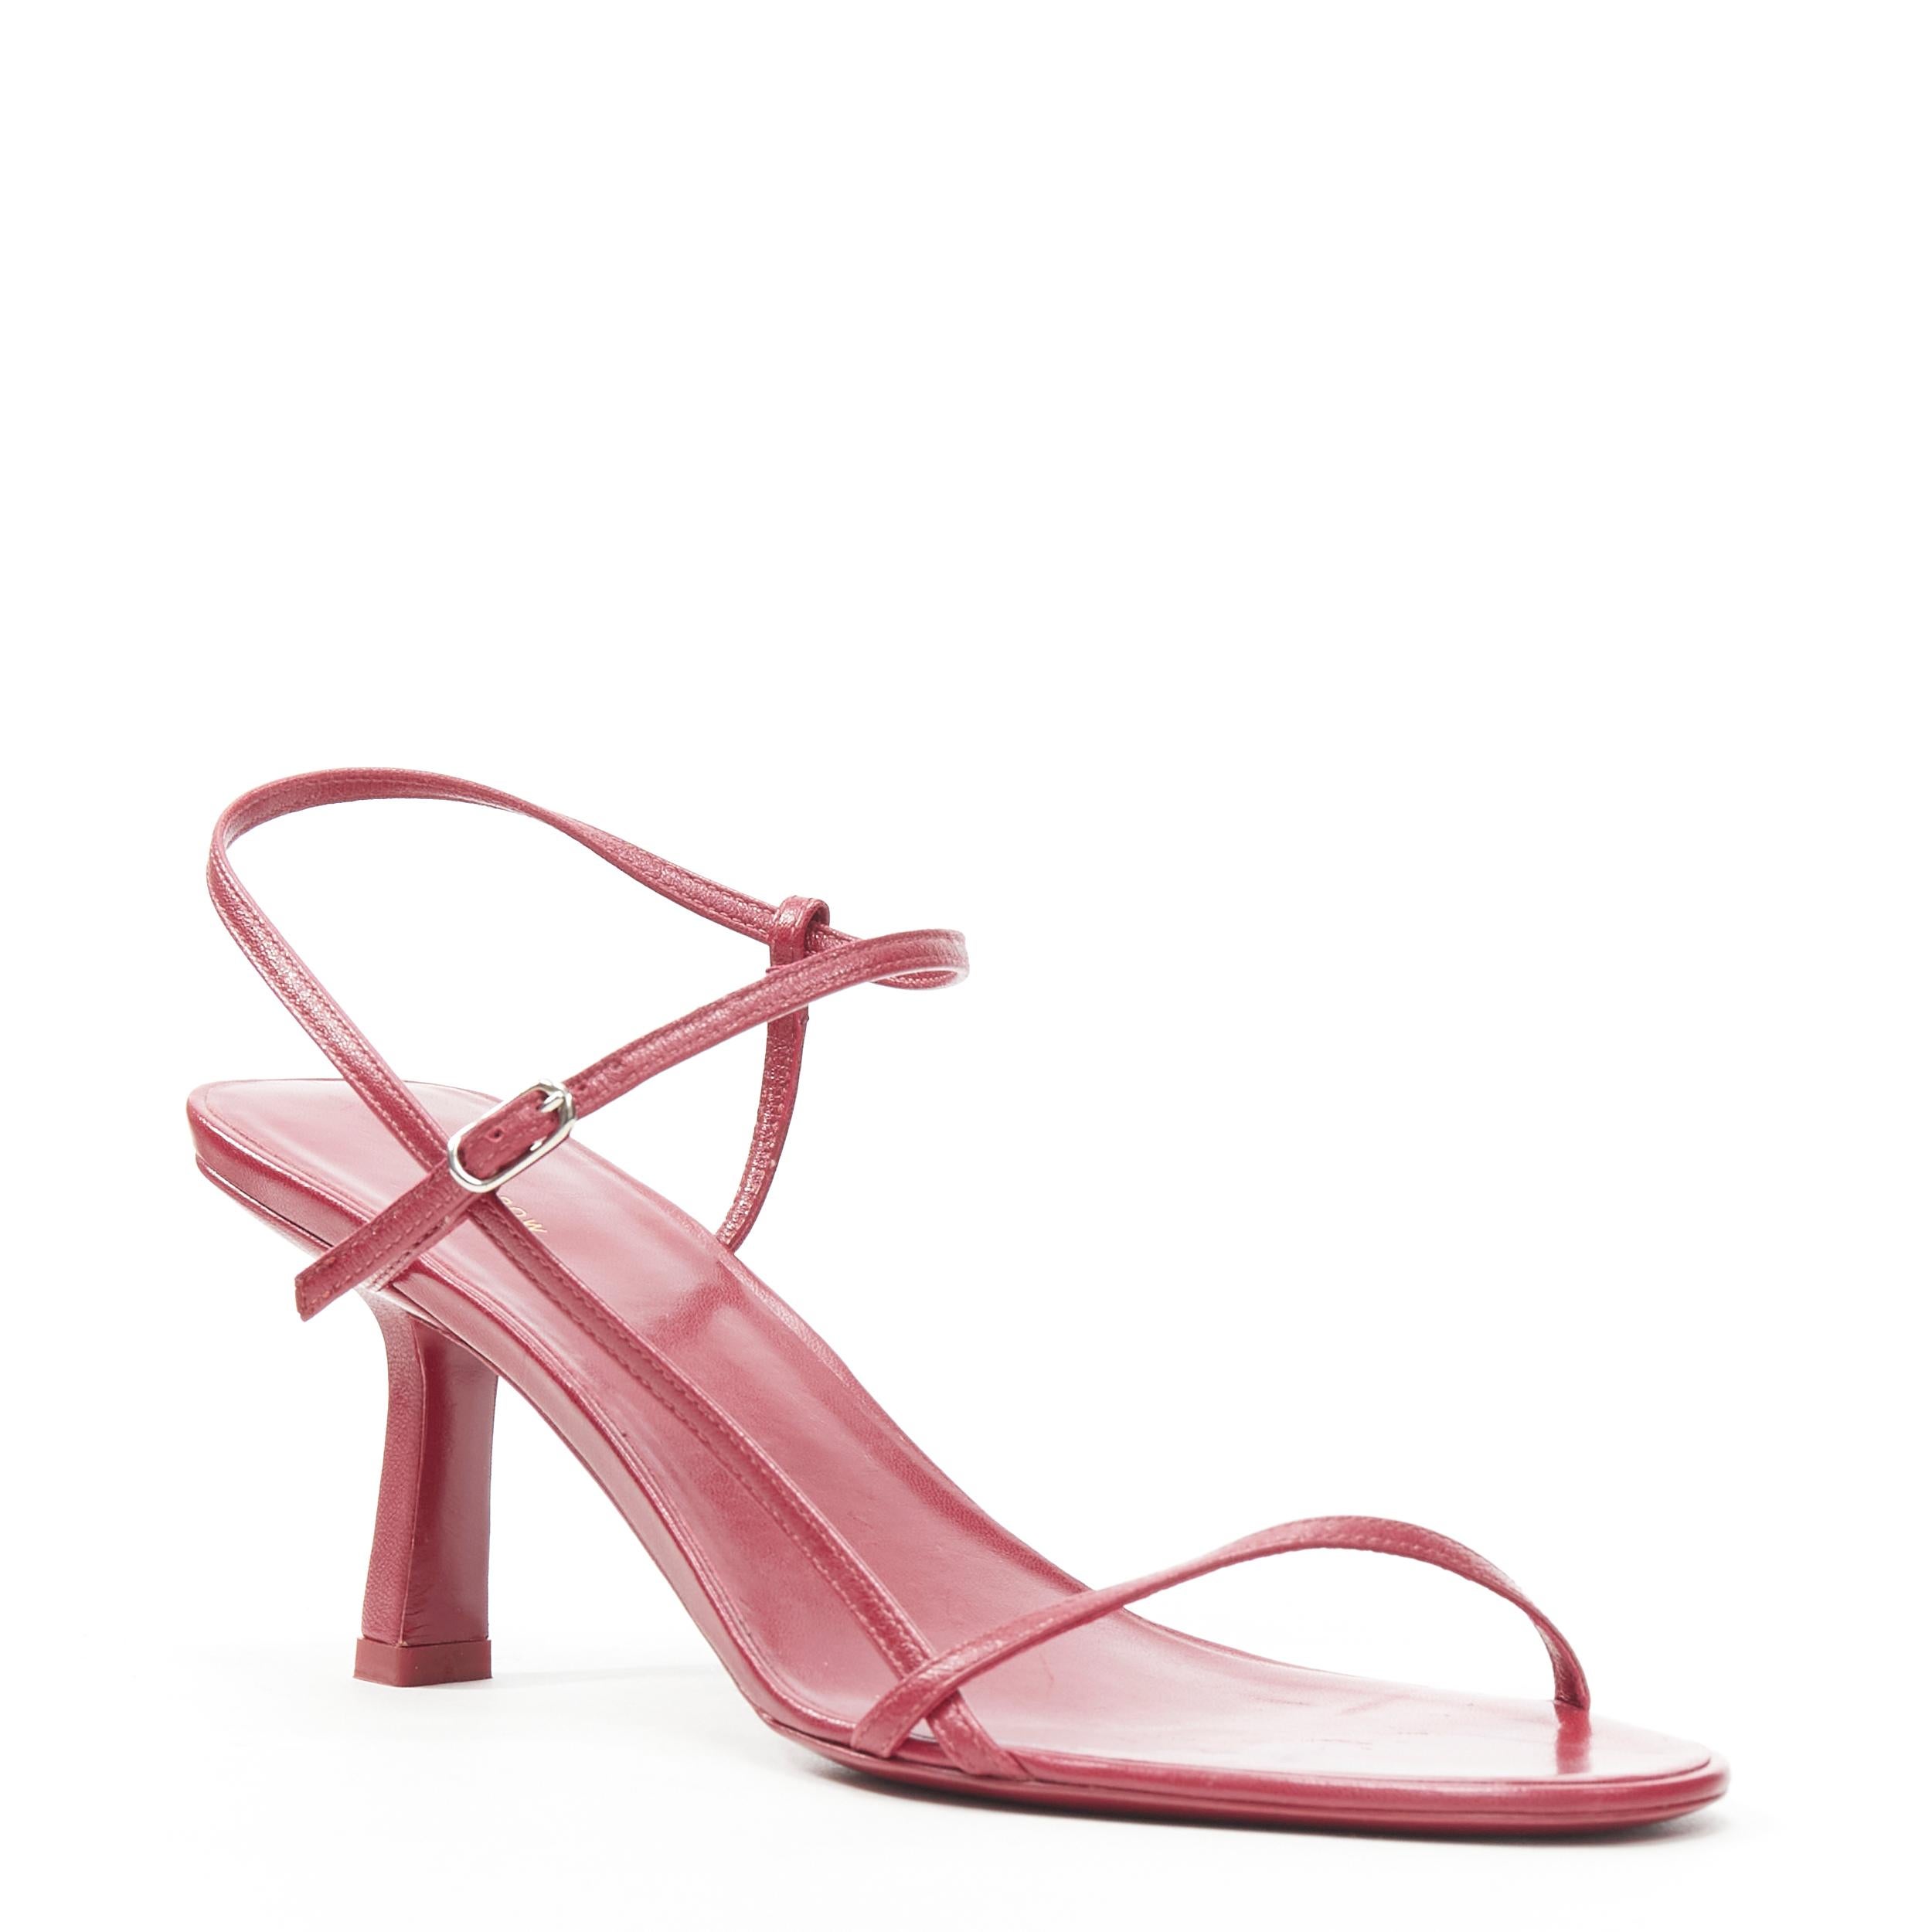 new THE ROW Bare 65 burgundy red minimalist sling mid heel sandals EU36.5 
Reference: TGAS/B01249 
Brand: The Row 
Model: Bare sandal 65mm 
Material: Leather 
Color: Red 
Pattern: Solid 
Closure: Ankle strap 
Estimated Retail Price: US $880 
Made